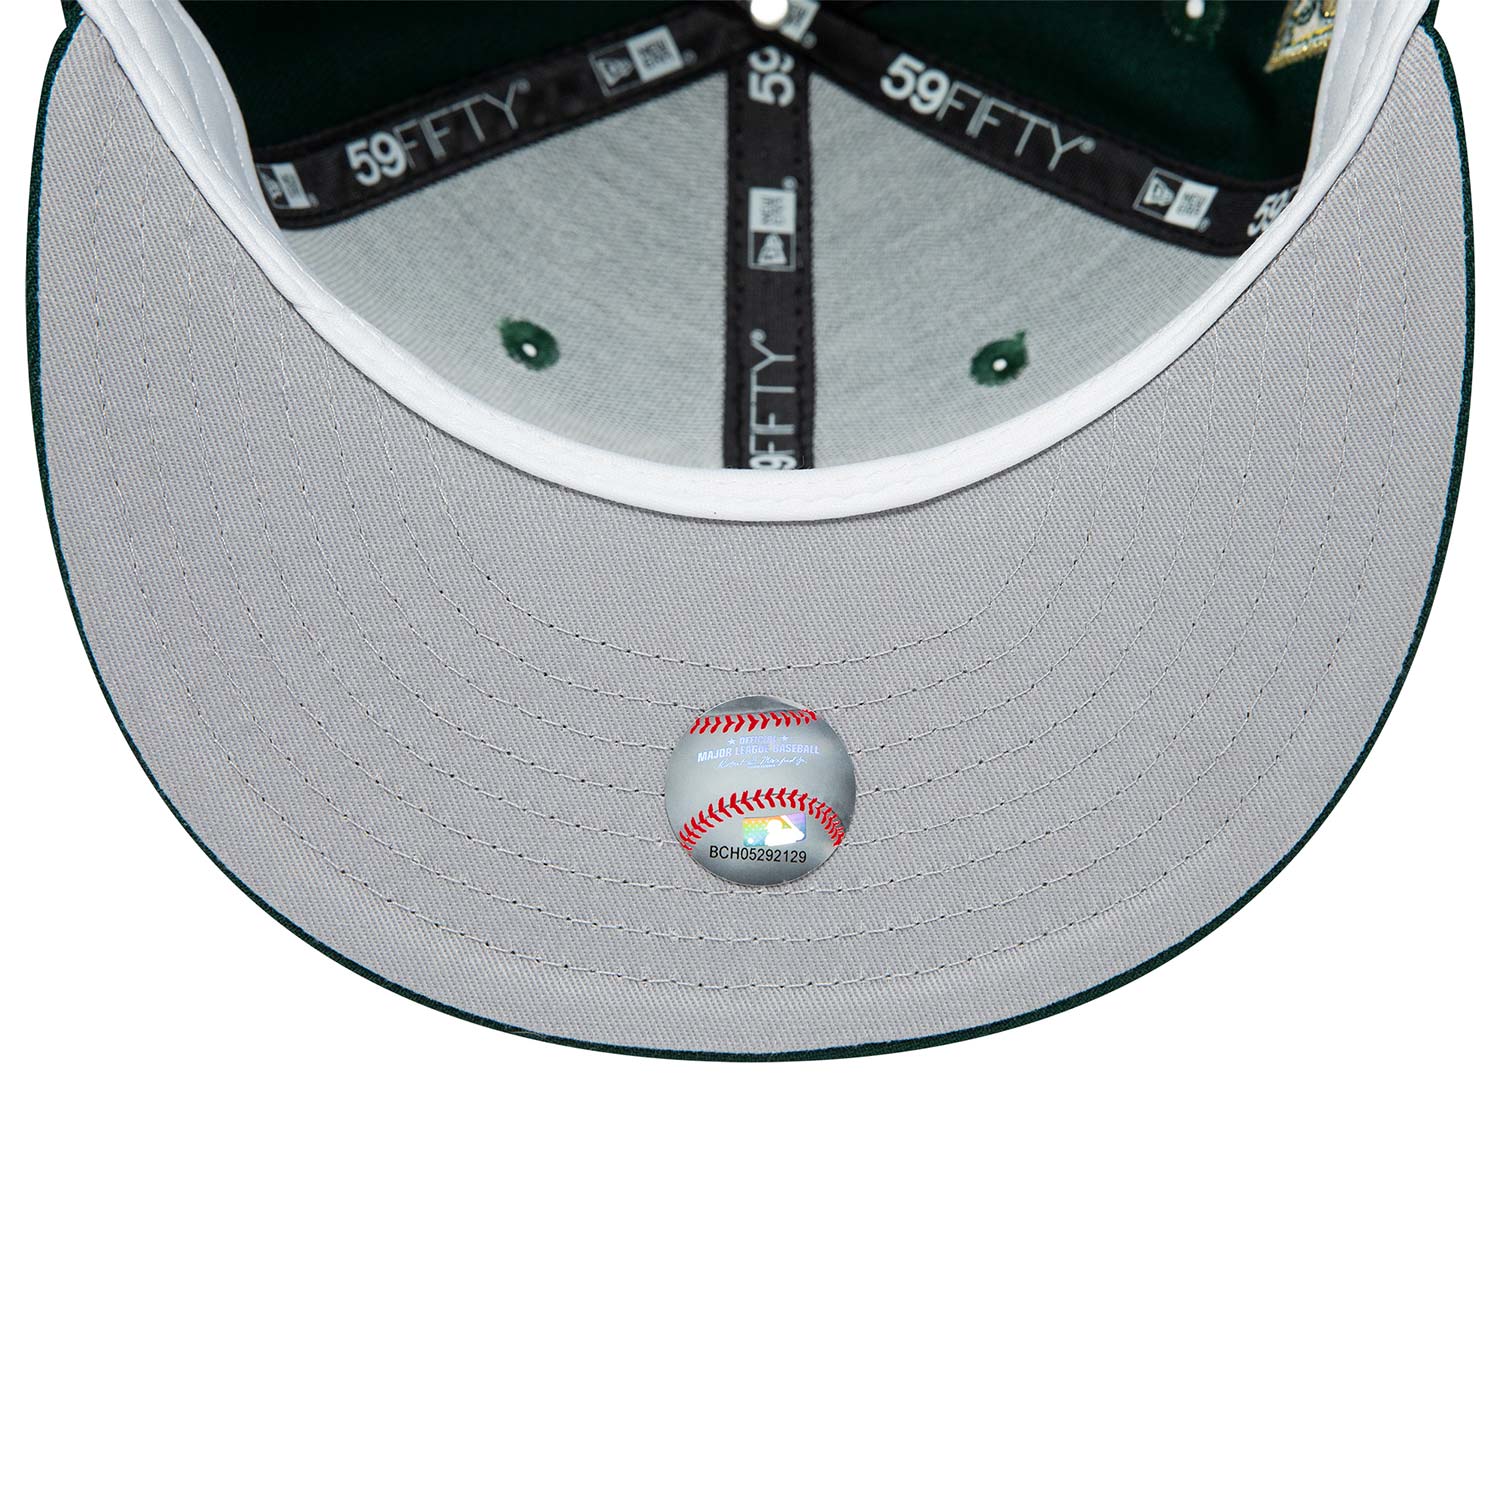 Casquette 59FIFTY Fitted Oakland Athletics Vert Forêt